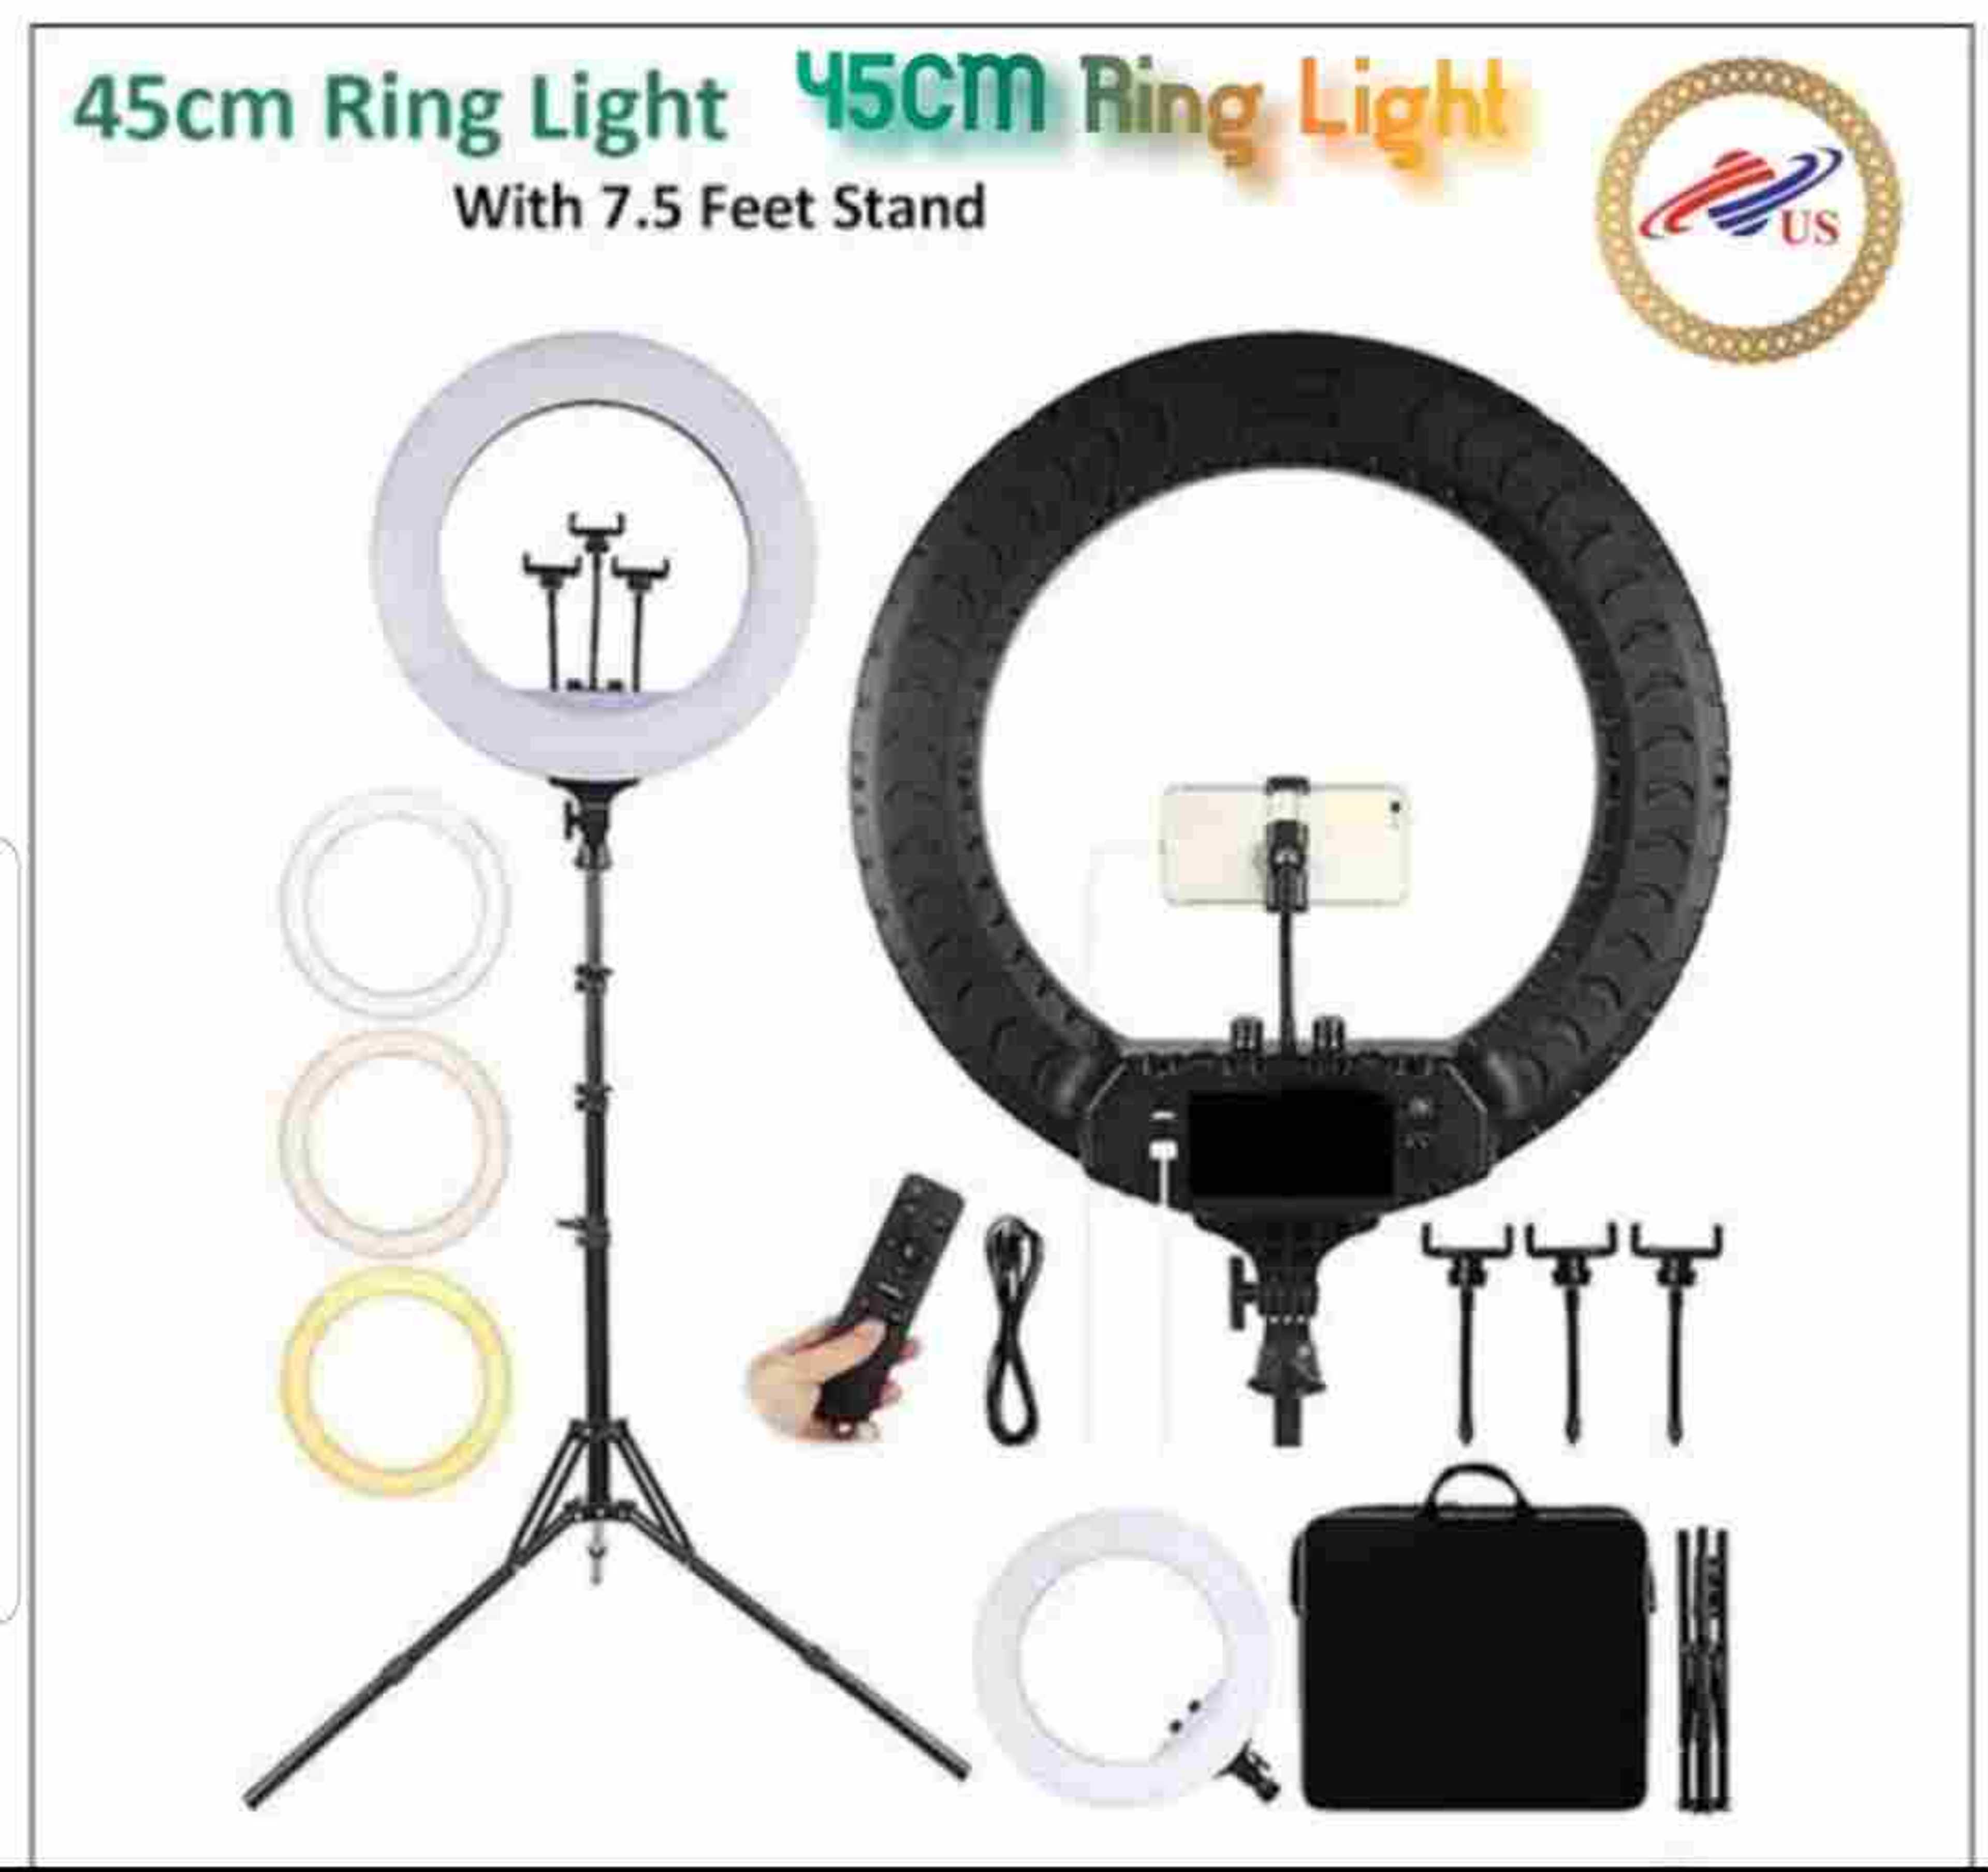 Ring light 45Cm with stand